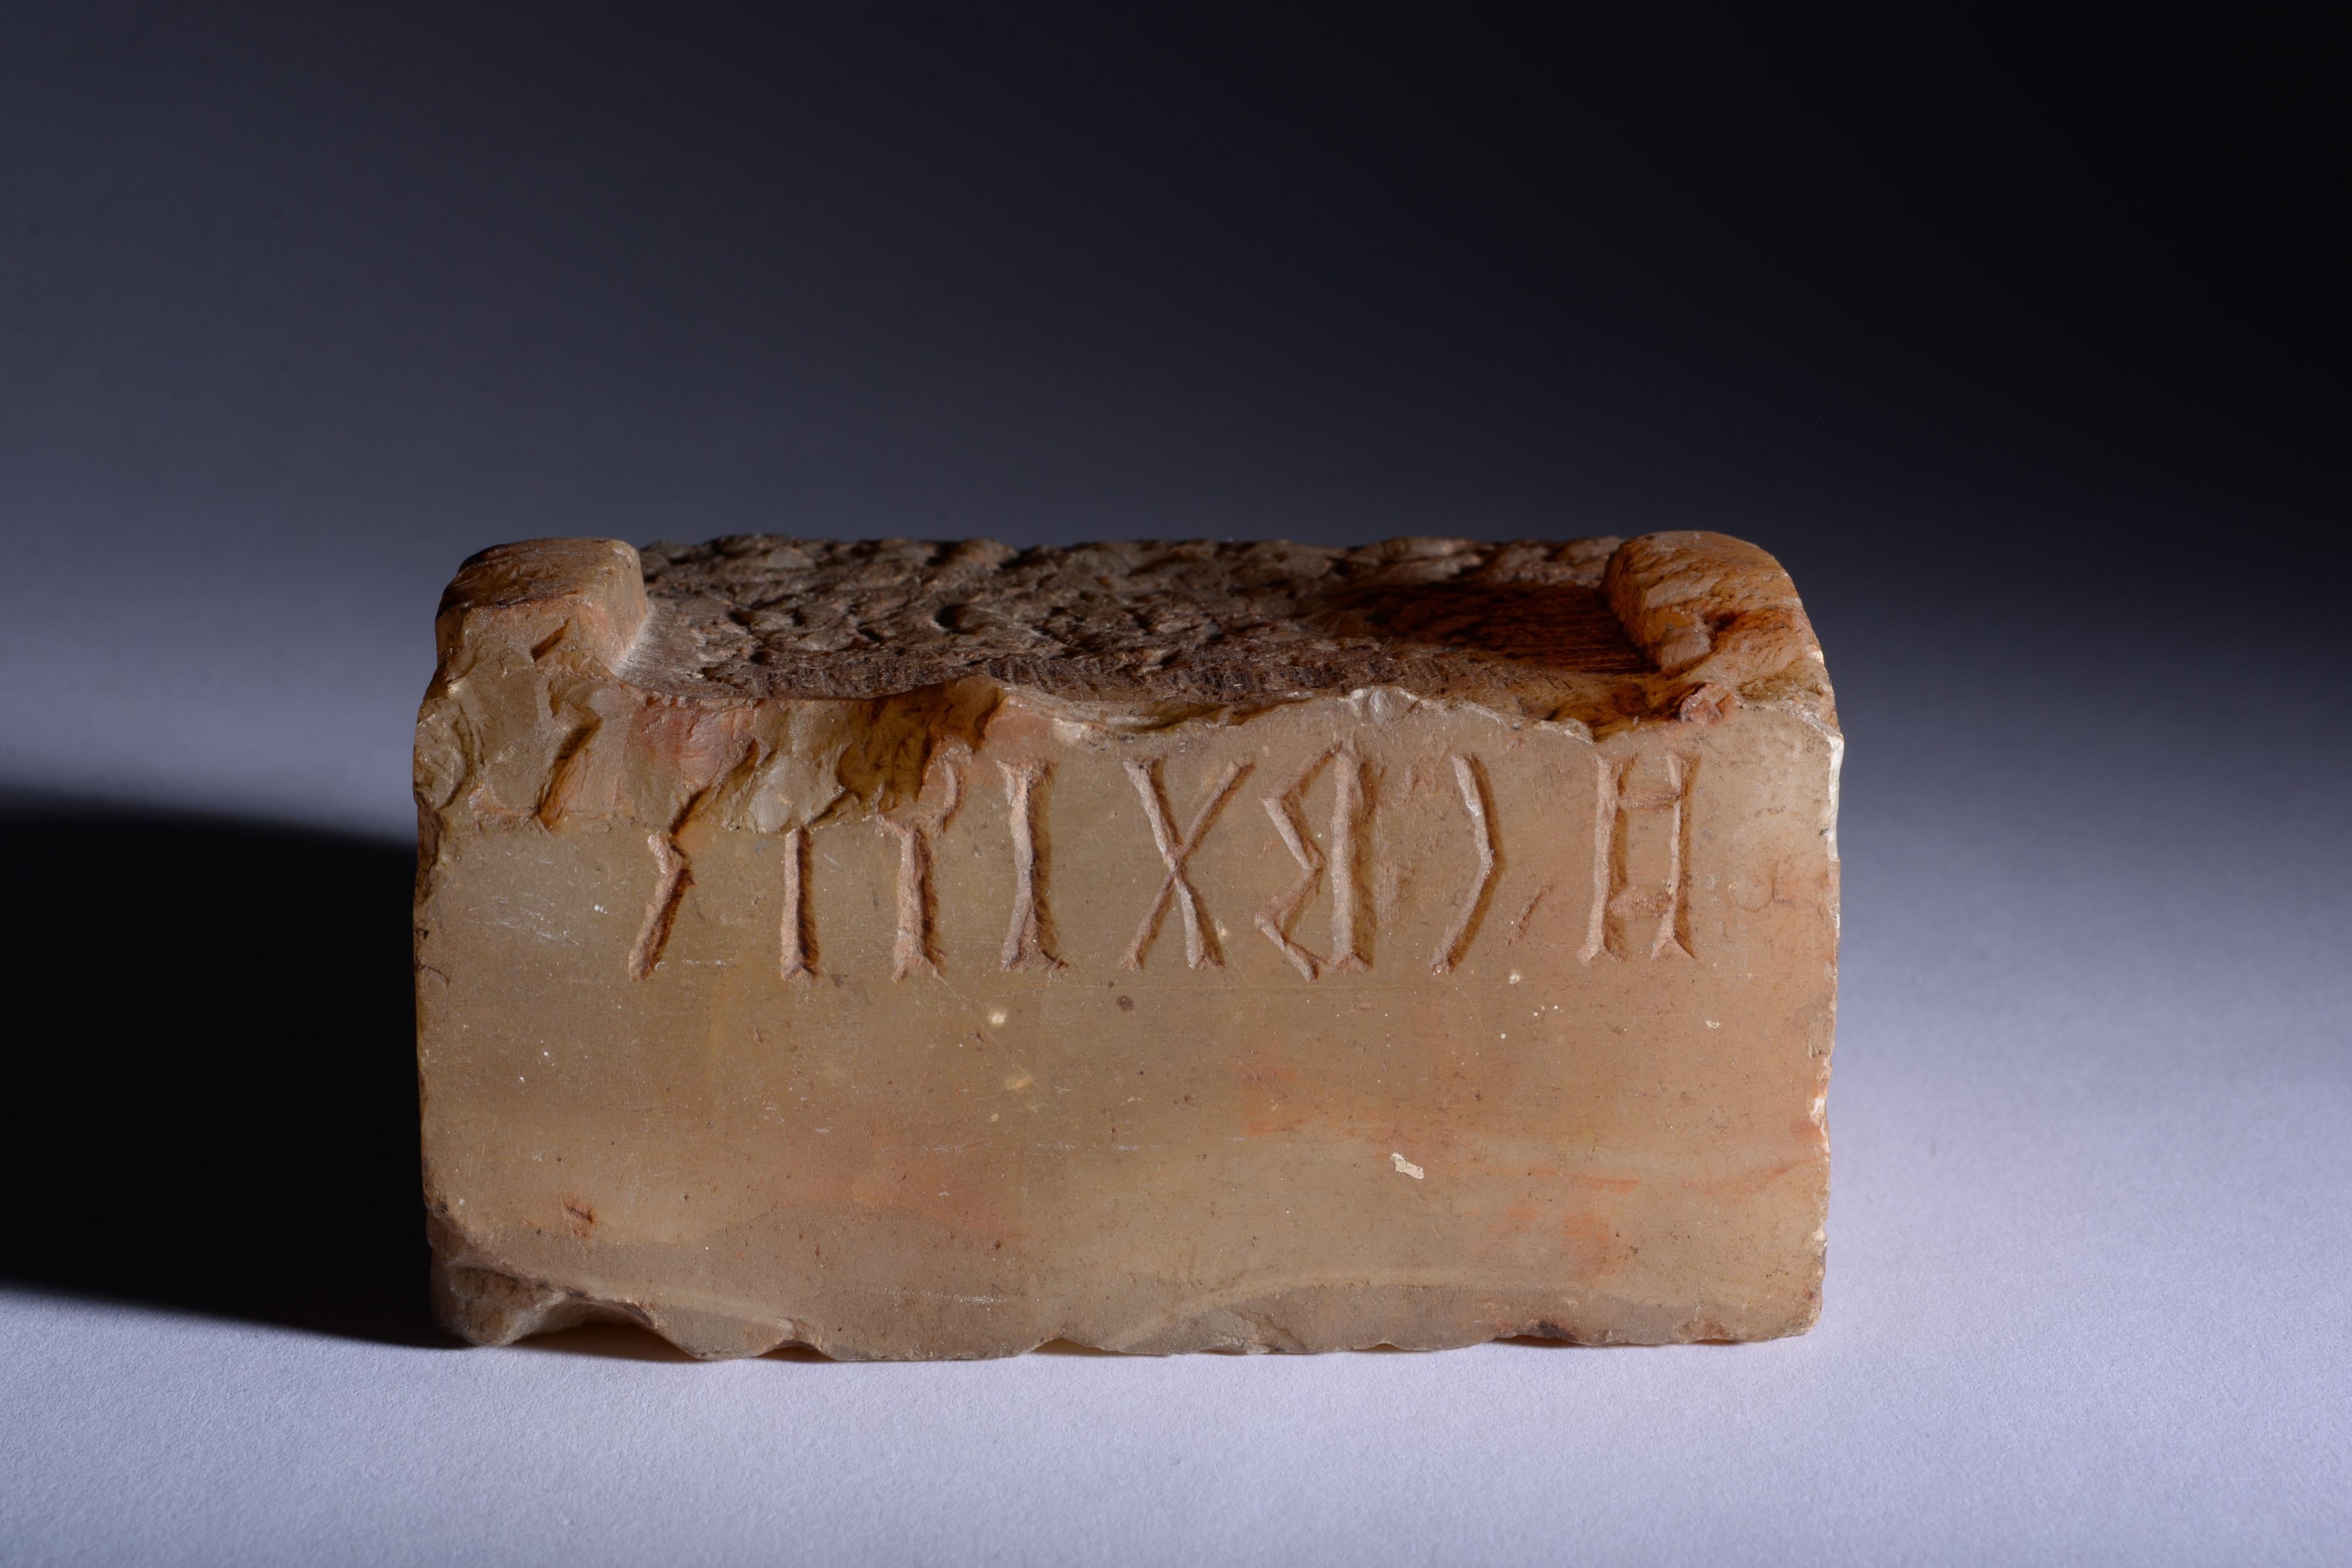 Base from a South Arabian Statue with Qatabanic Inscription
Alabaster
circa 1st century B.C.

‘’Consequently, neither white marble of Paros nor any other stone which men admire can be compared with the precious stones of Arabia, since their